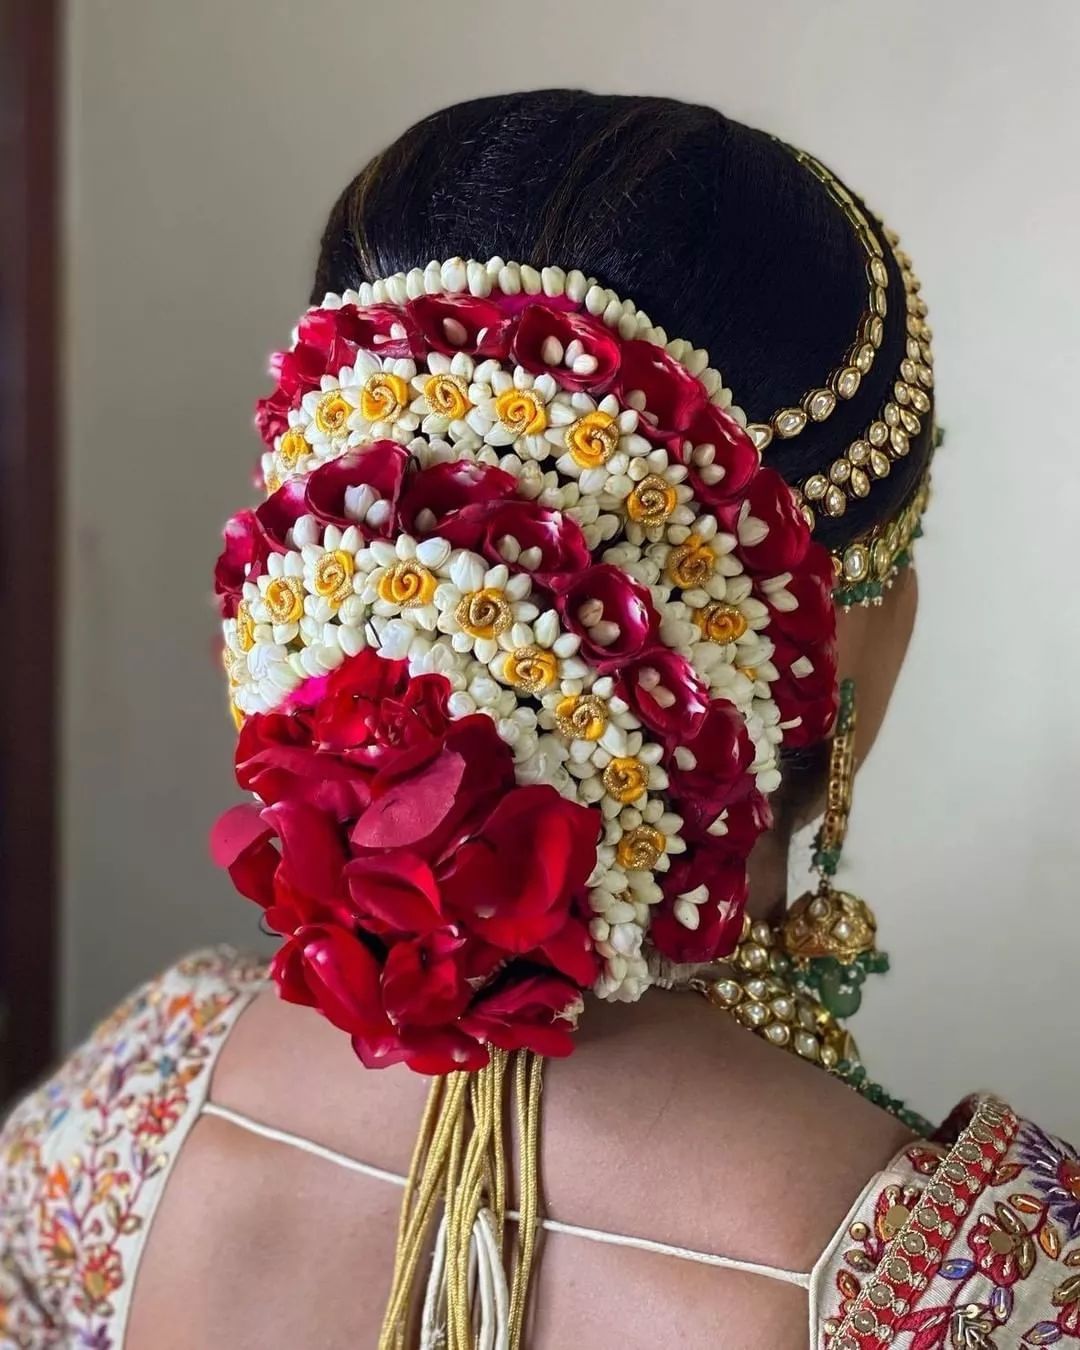 The Best Bridal Hairstyle Goals of 2022